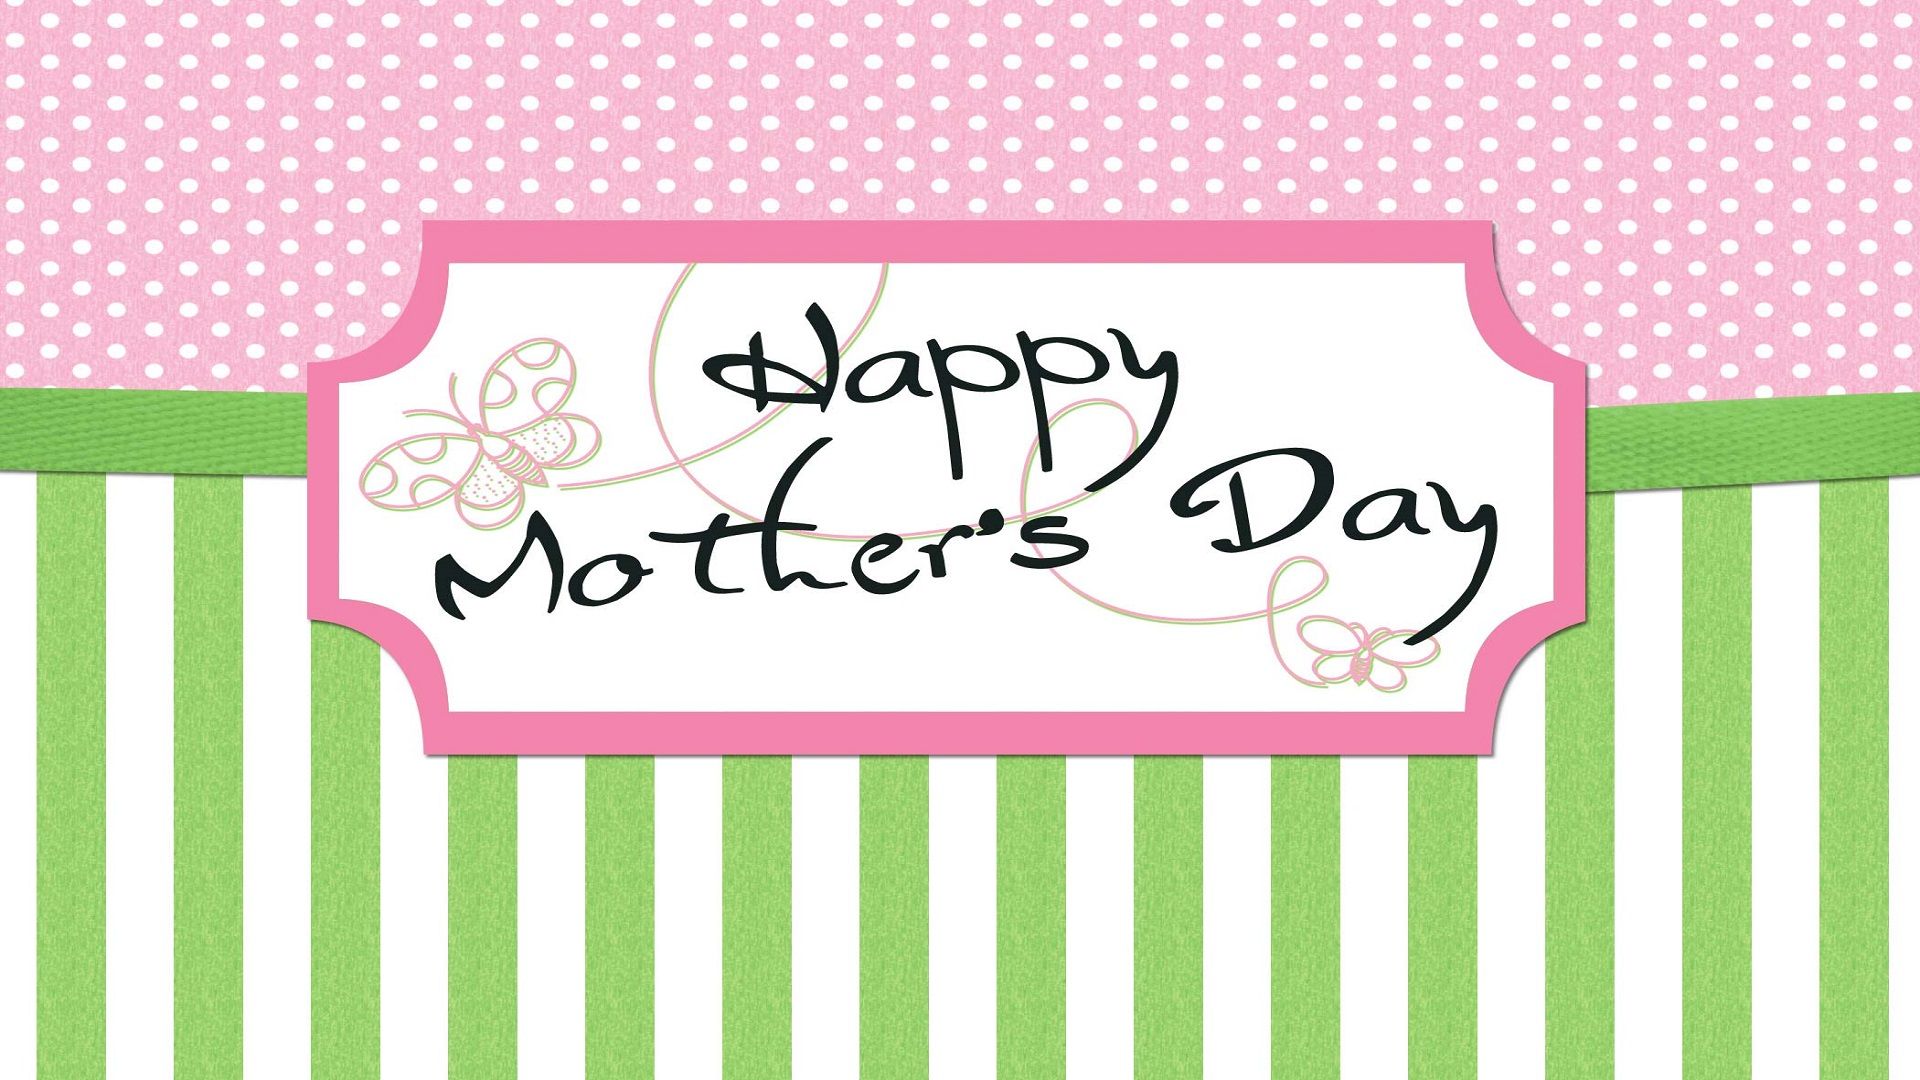 happy mothers day wallpaper backgroundto5animations.com Wallpaper, Gifs, Background, Image. Happy mothers day wallpaper, Happy mothers day image, Facebook cover